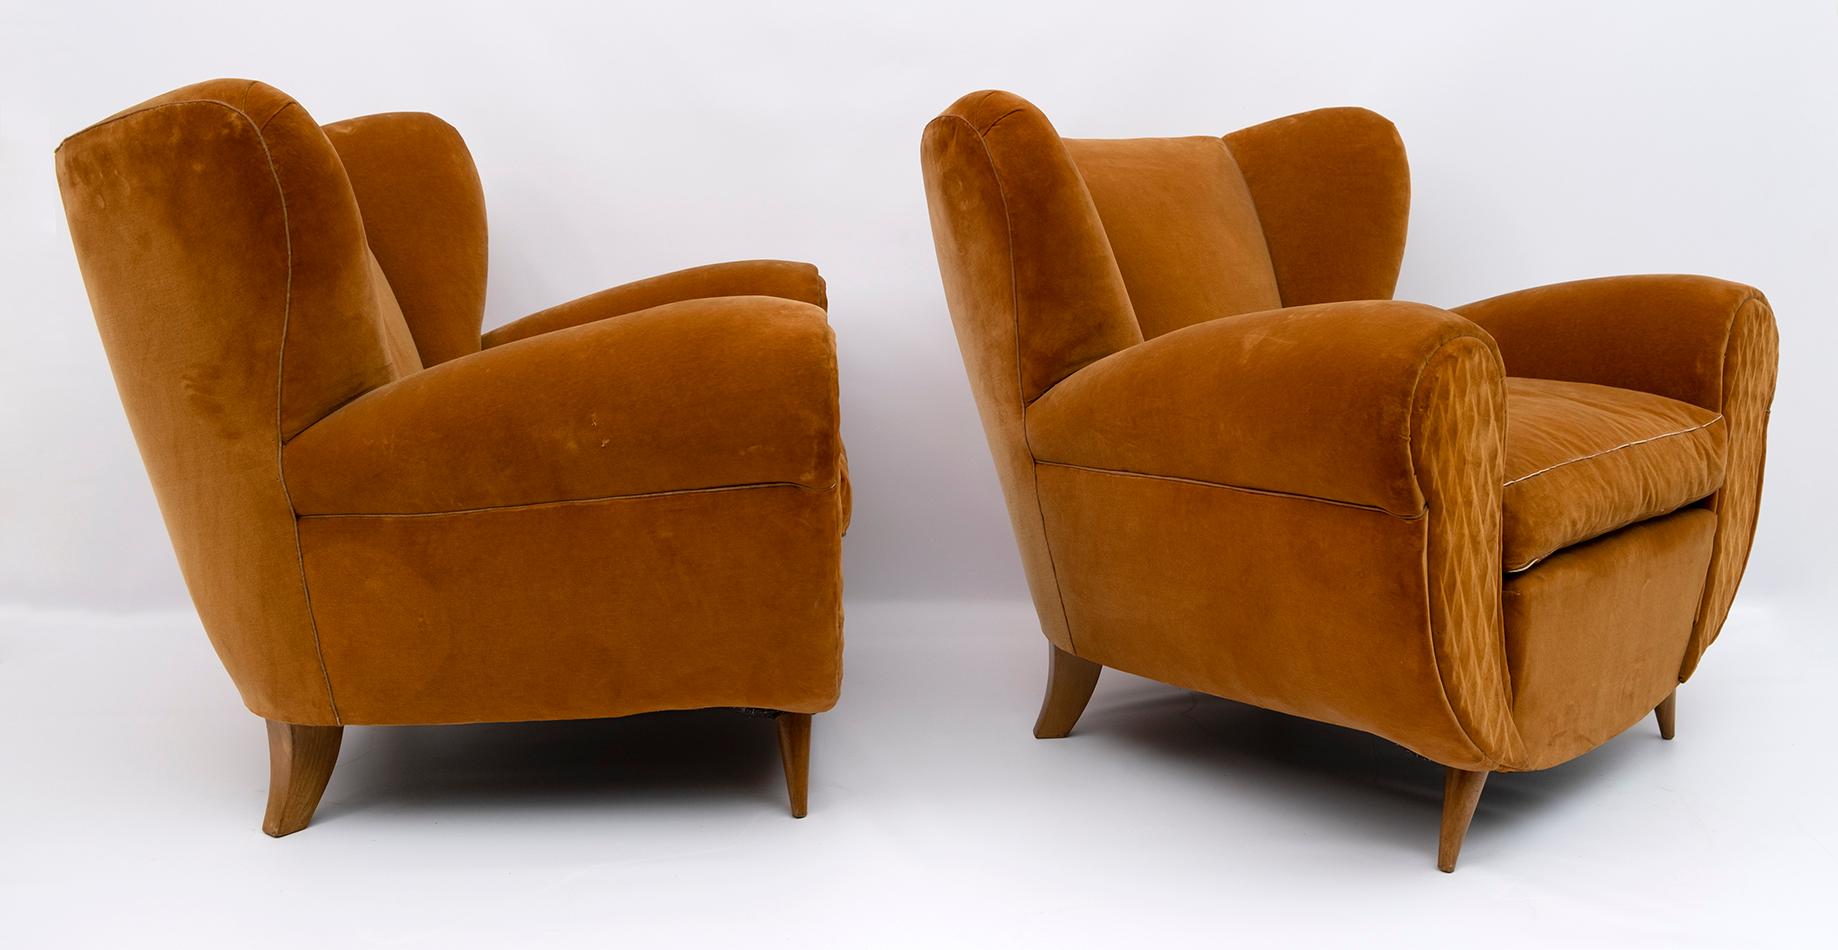 Particular pair of armchairs designed by the famous architect Guglielmo Ulrich, production of the 40s in Art Déco style.
The upholstery is original from the time but it is recommended to replace it, as you can see from the photos, it is faded and